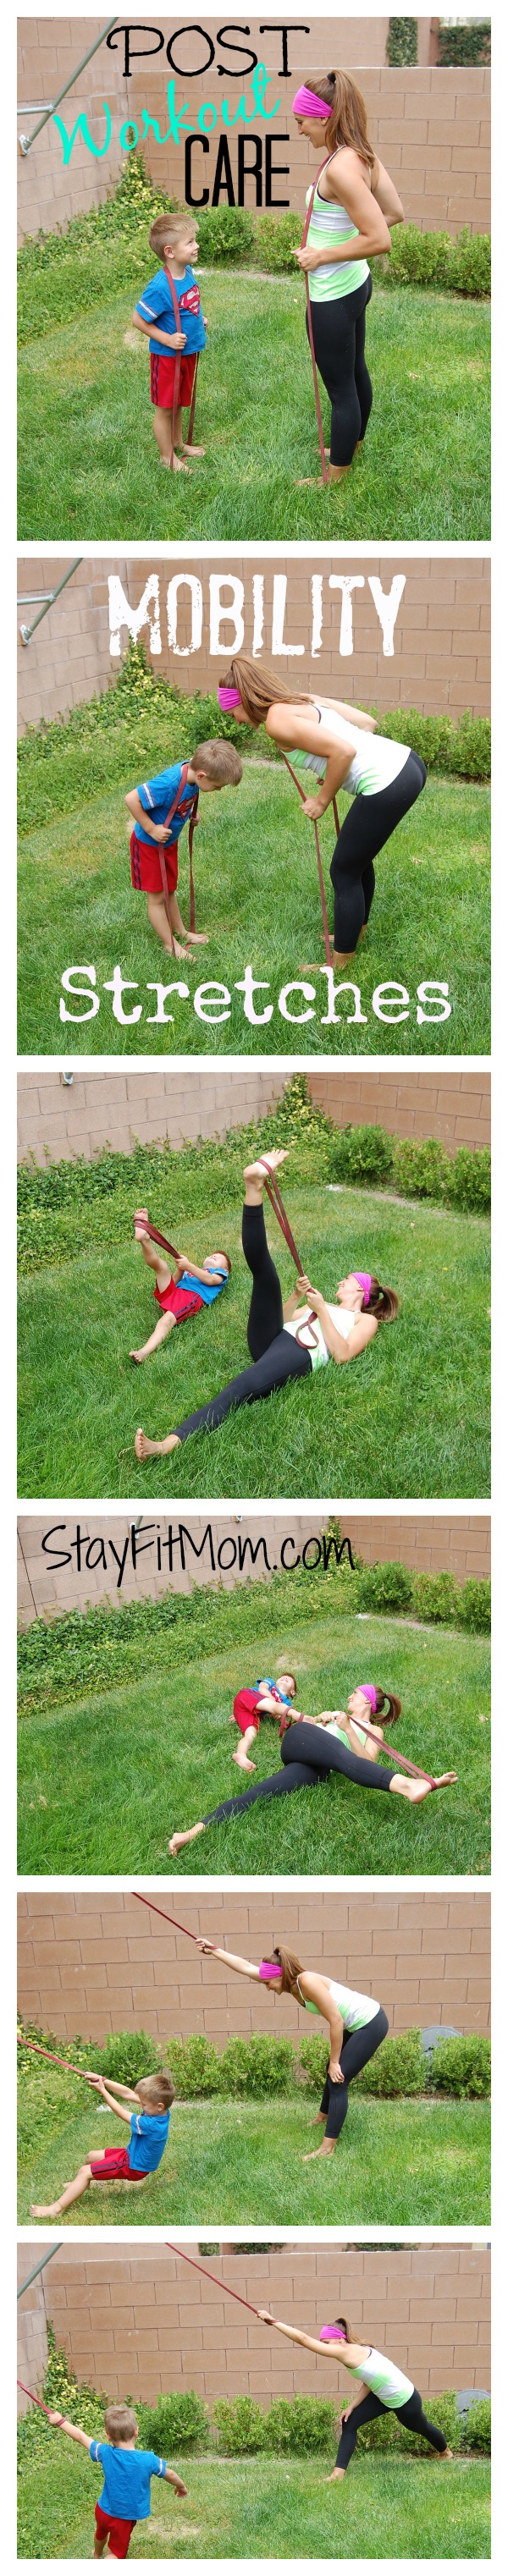 Mobility stretches for post workout care at StayFitMom.com.